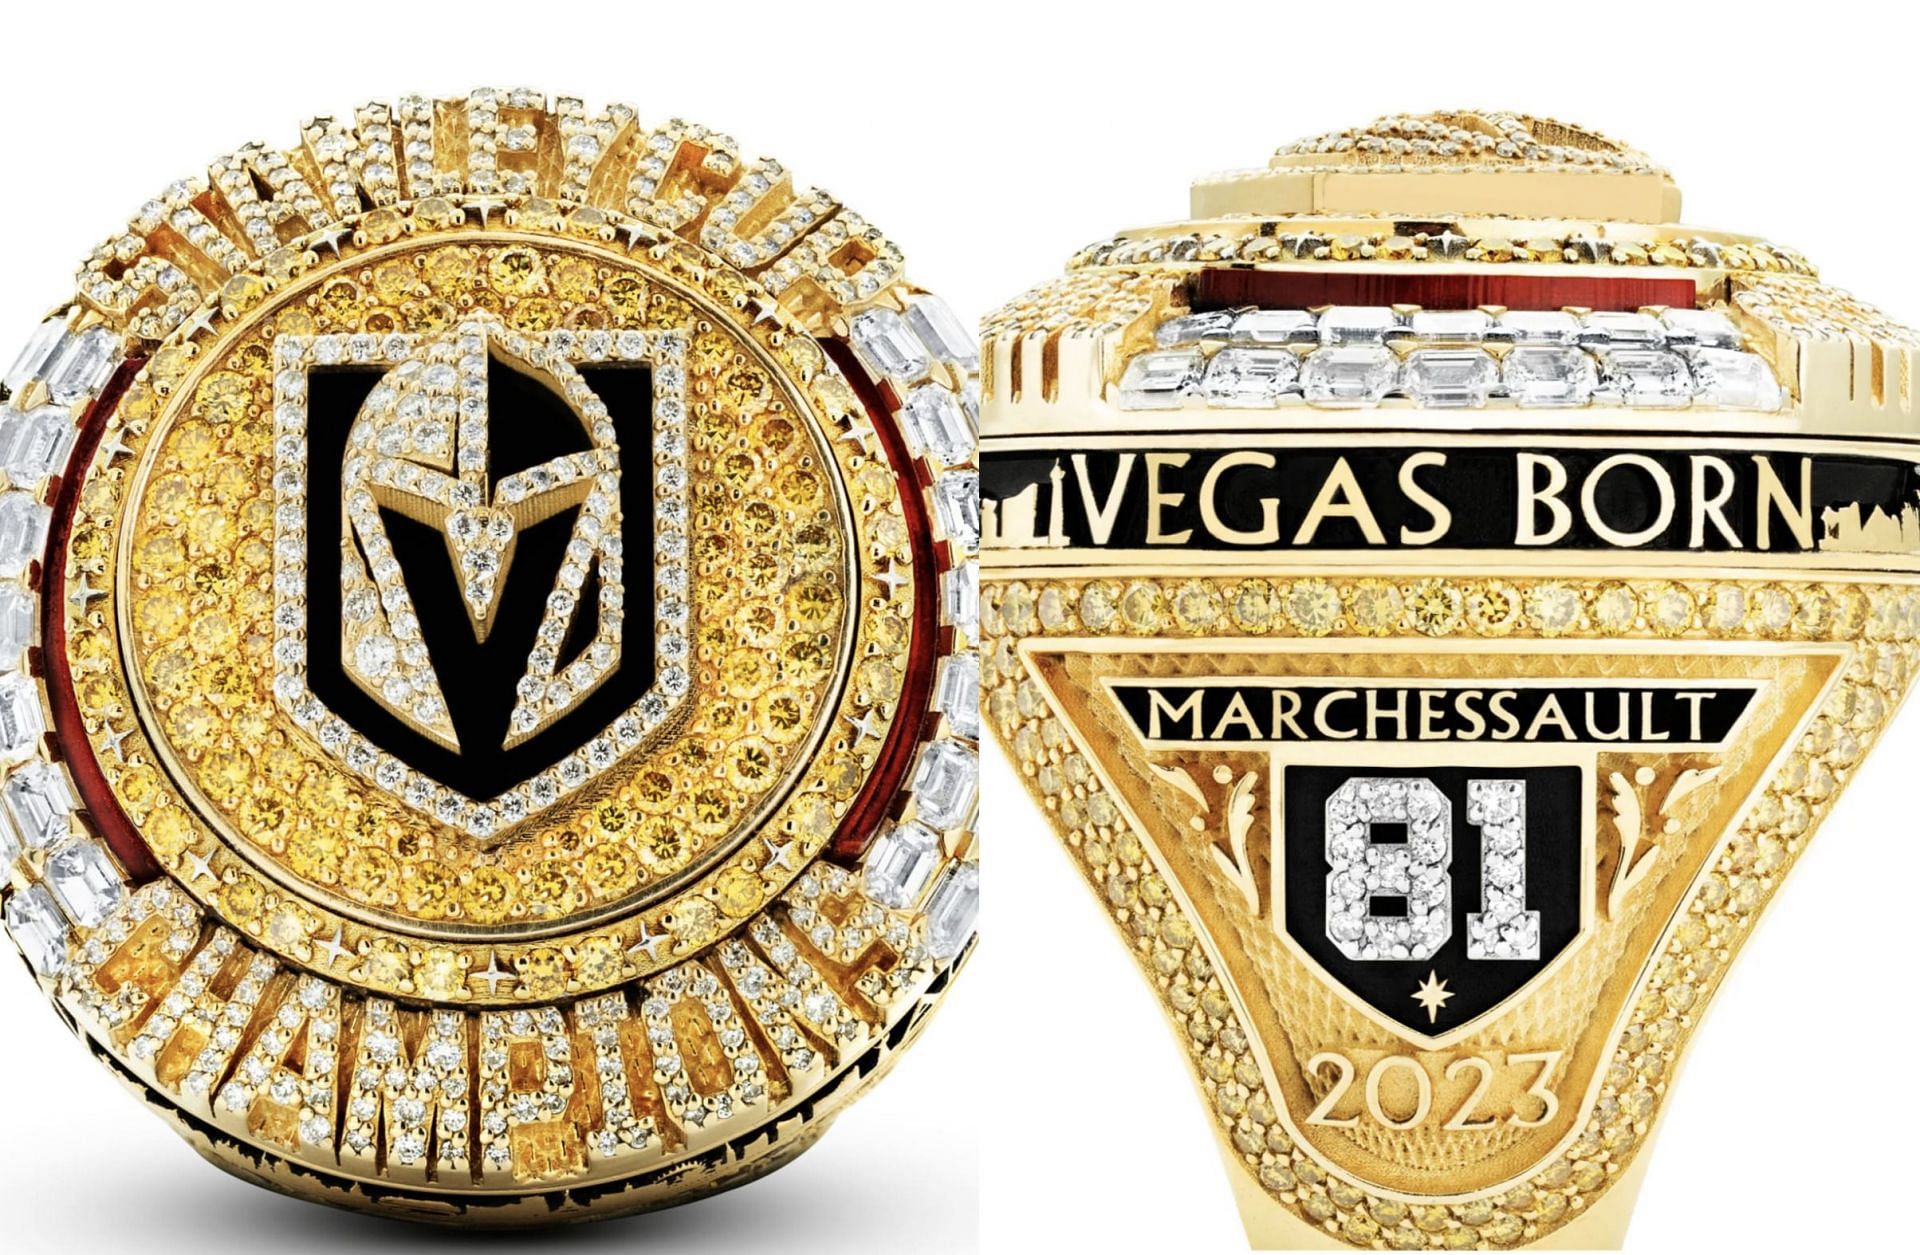 5 interesting facts about Golden Knights' championship ring feat. 12